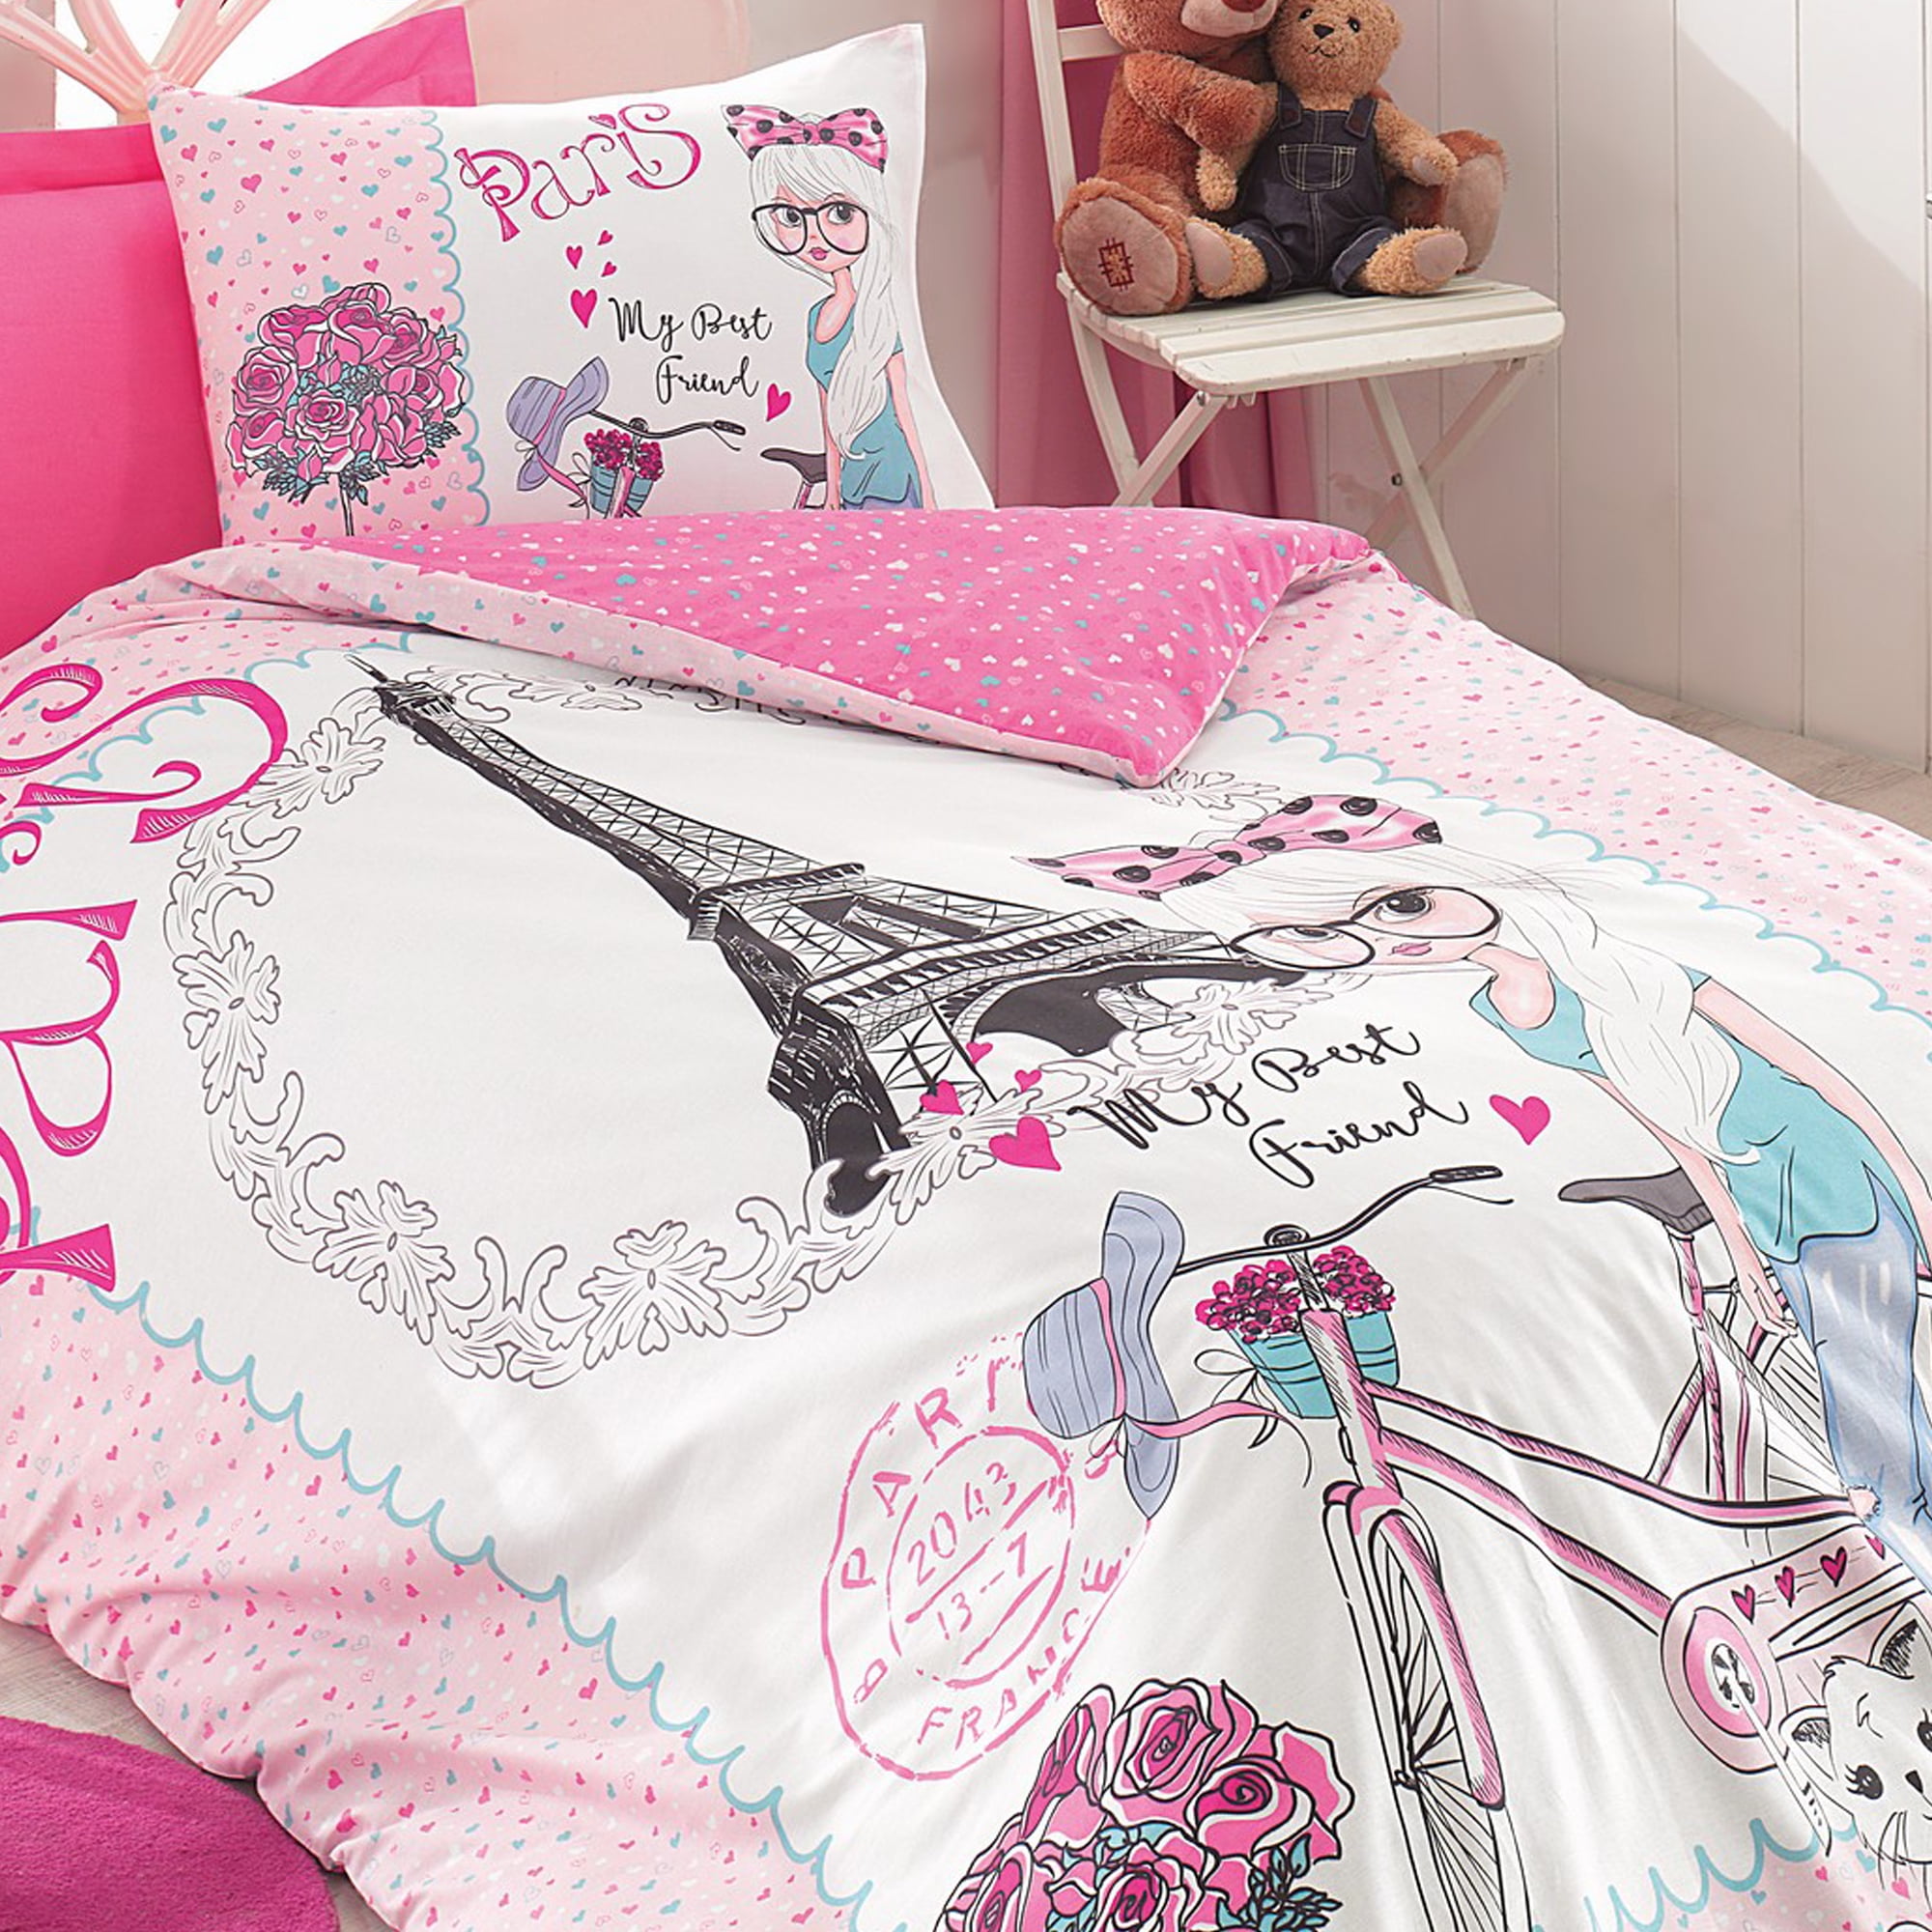 Sushome Pink Paris Kid 100 Cotton, How To Iron A Single Duvet Cover Easily